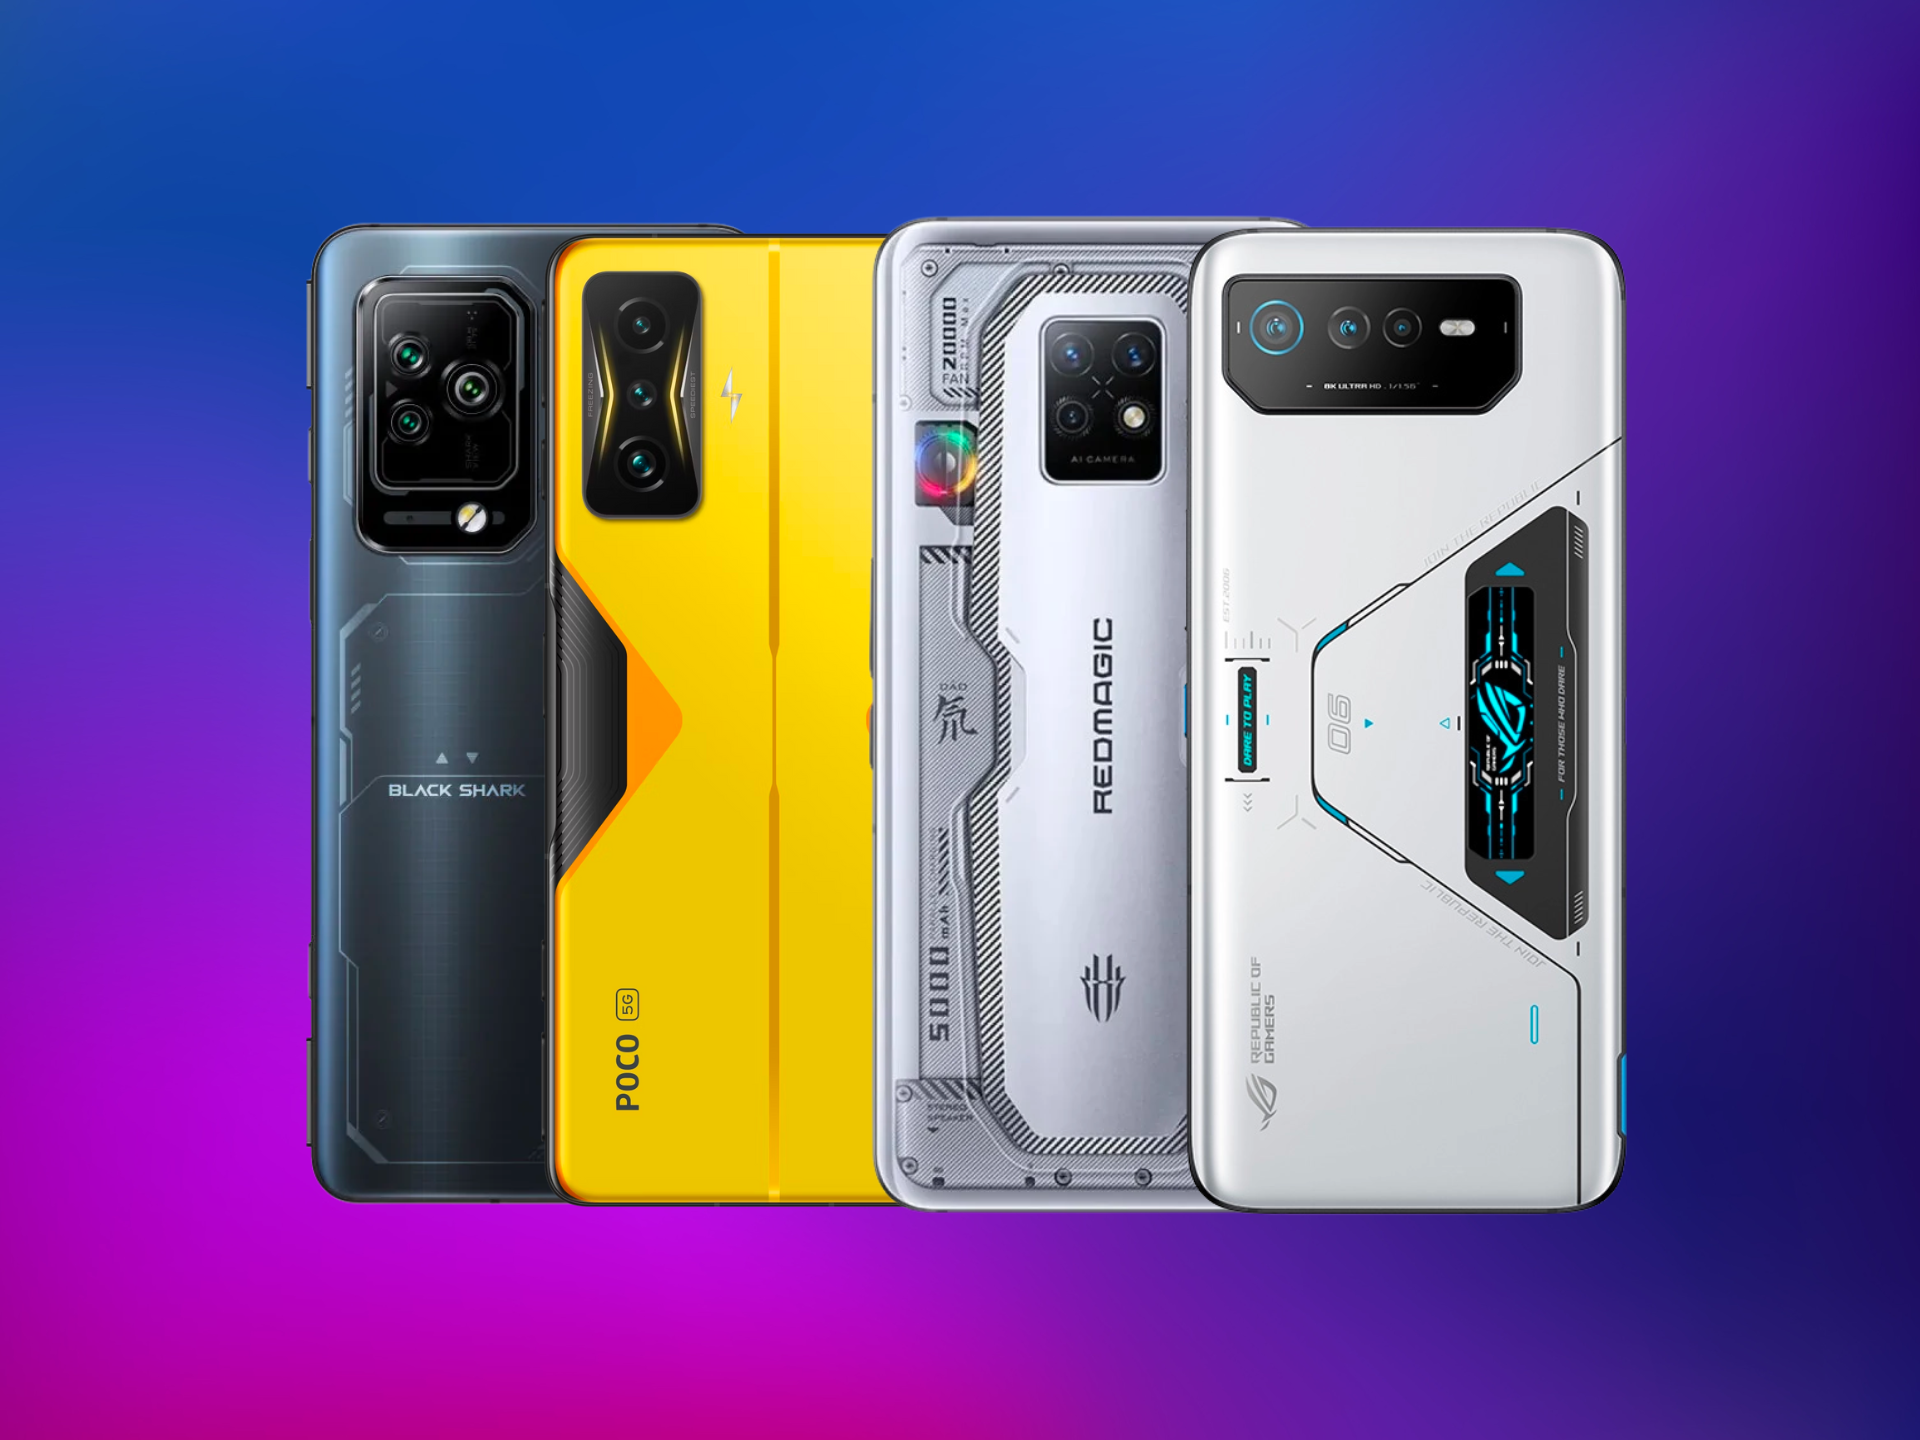 These are the best gaming phones in 2022 so far